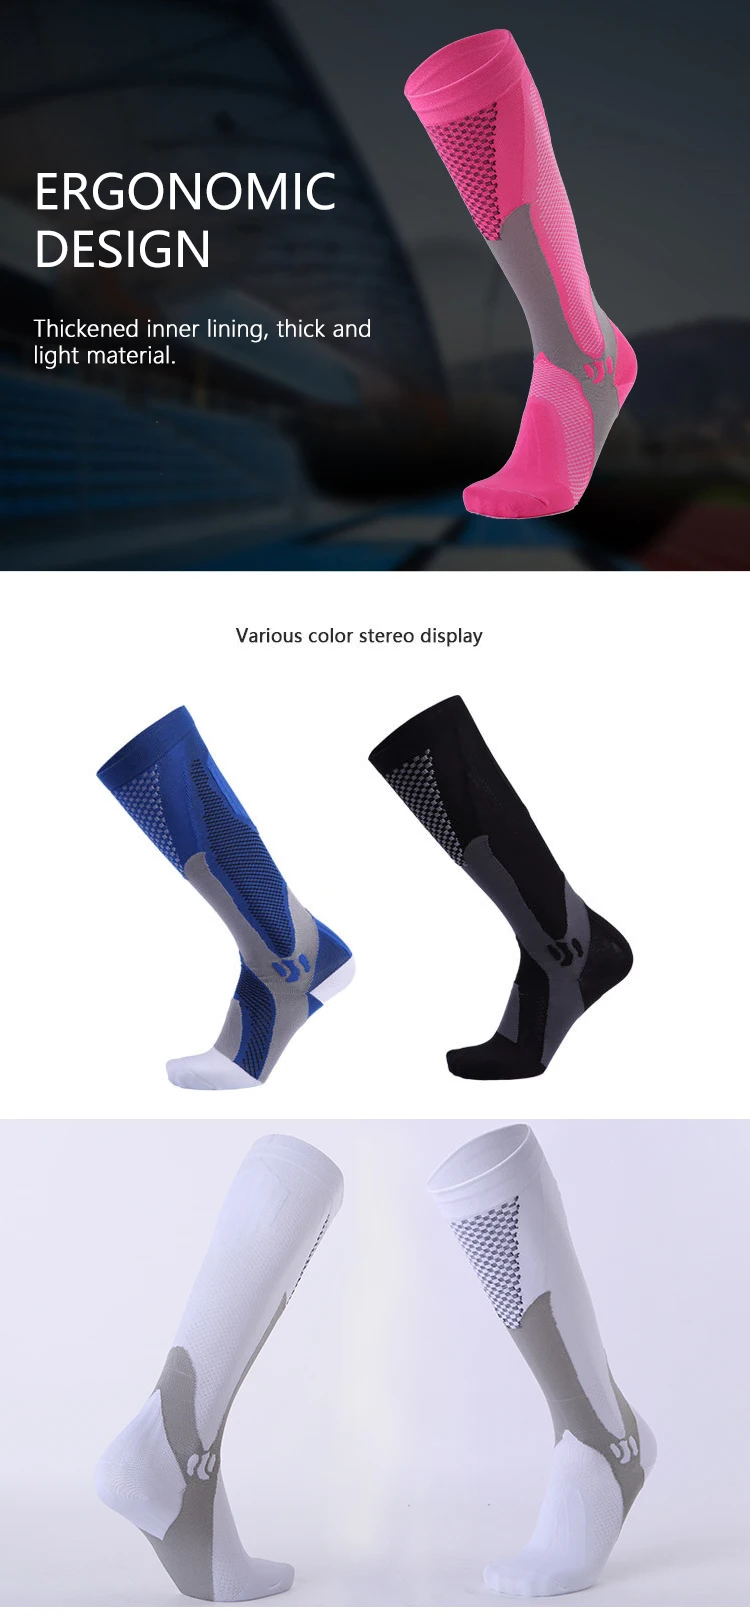 Enerup Whole Printing Colorful Copper Business Energy Compression Medical Crew Socks (8 Pairs) For Women & Men Private Label